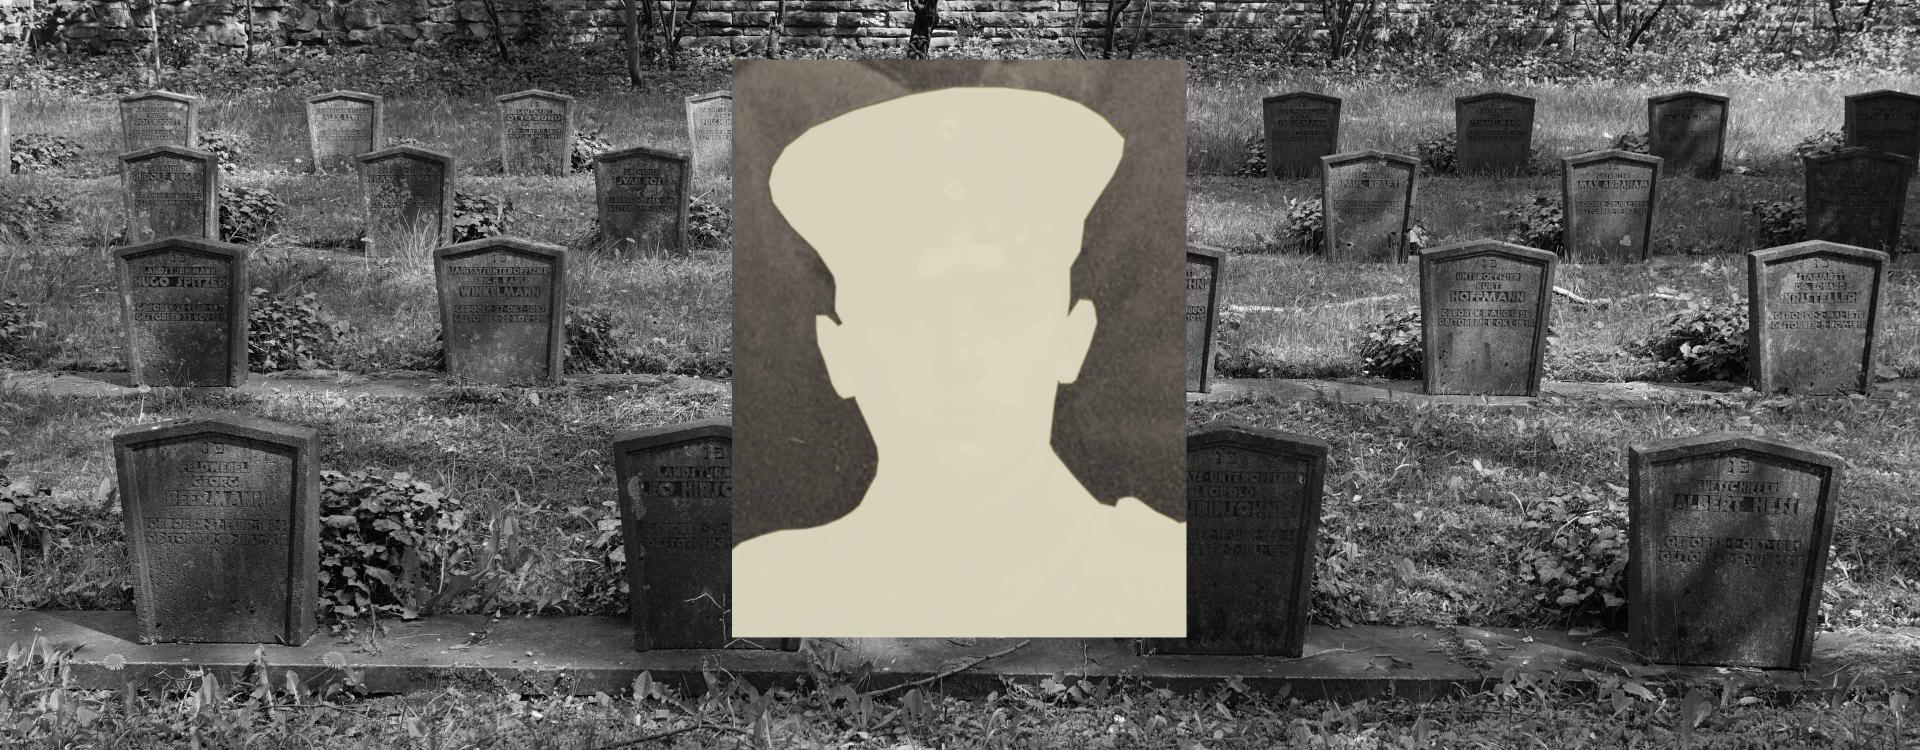 A collage: in the background are gravestones in a cemetery, in front of which is a passport photo showing only the silhouette of a head.